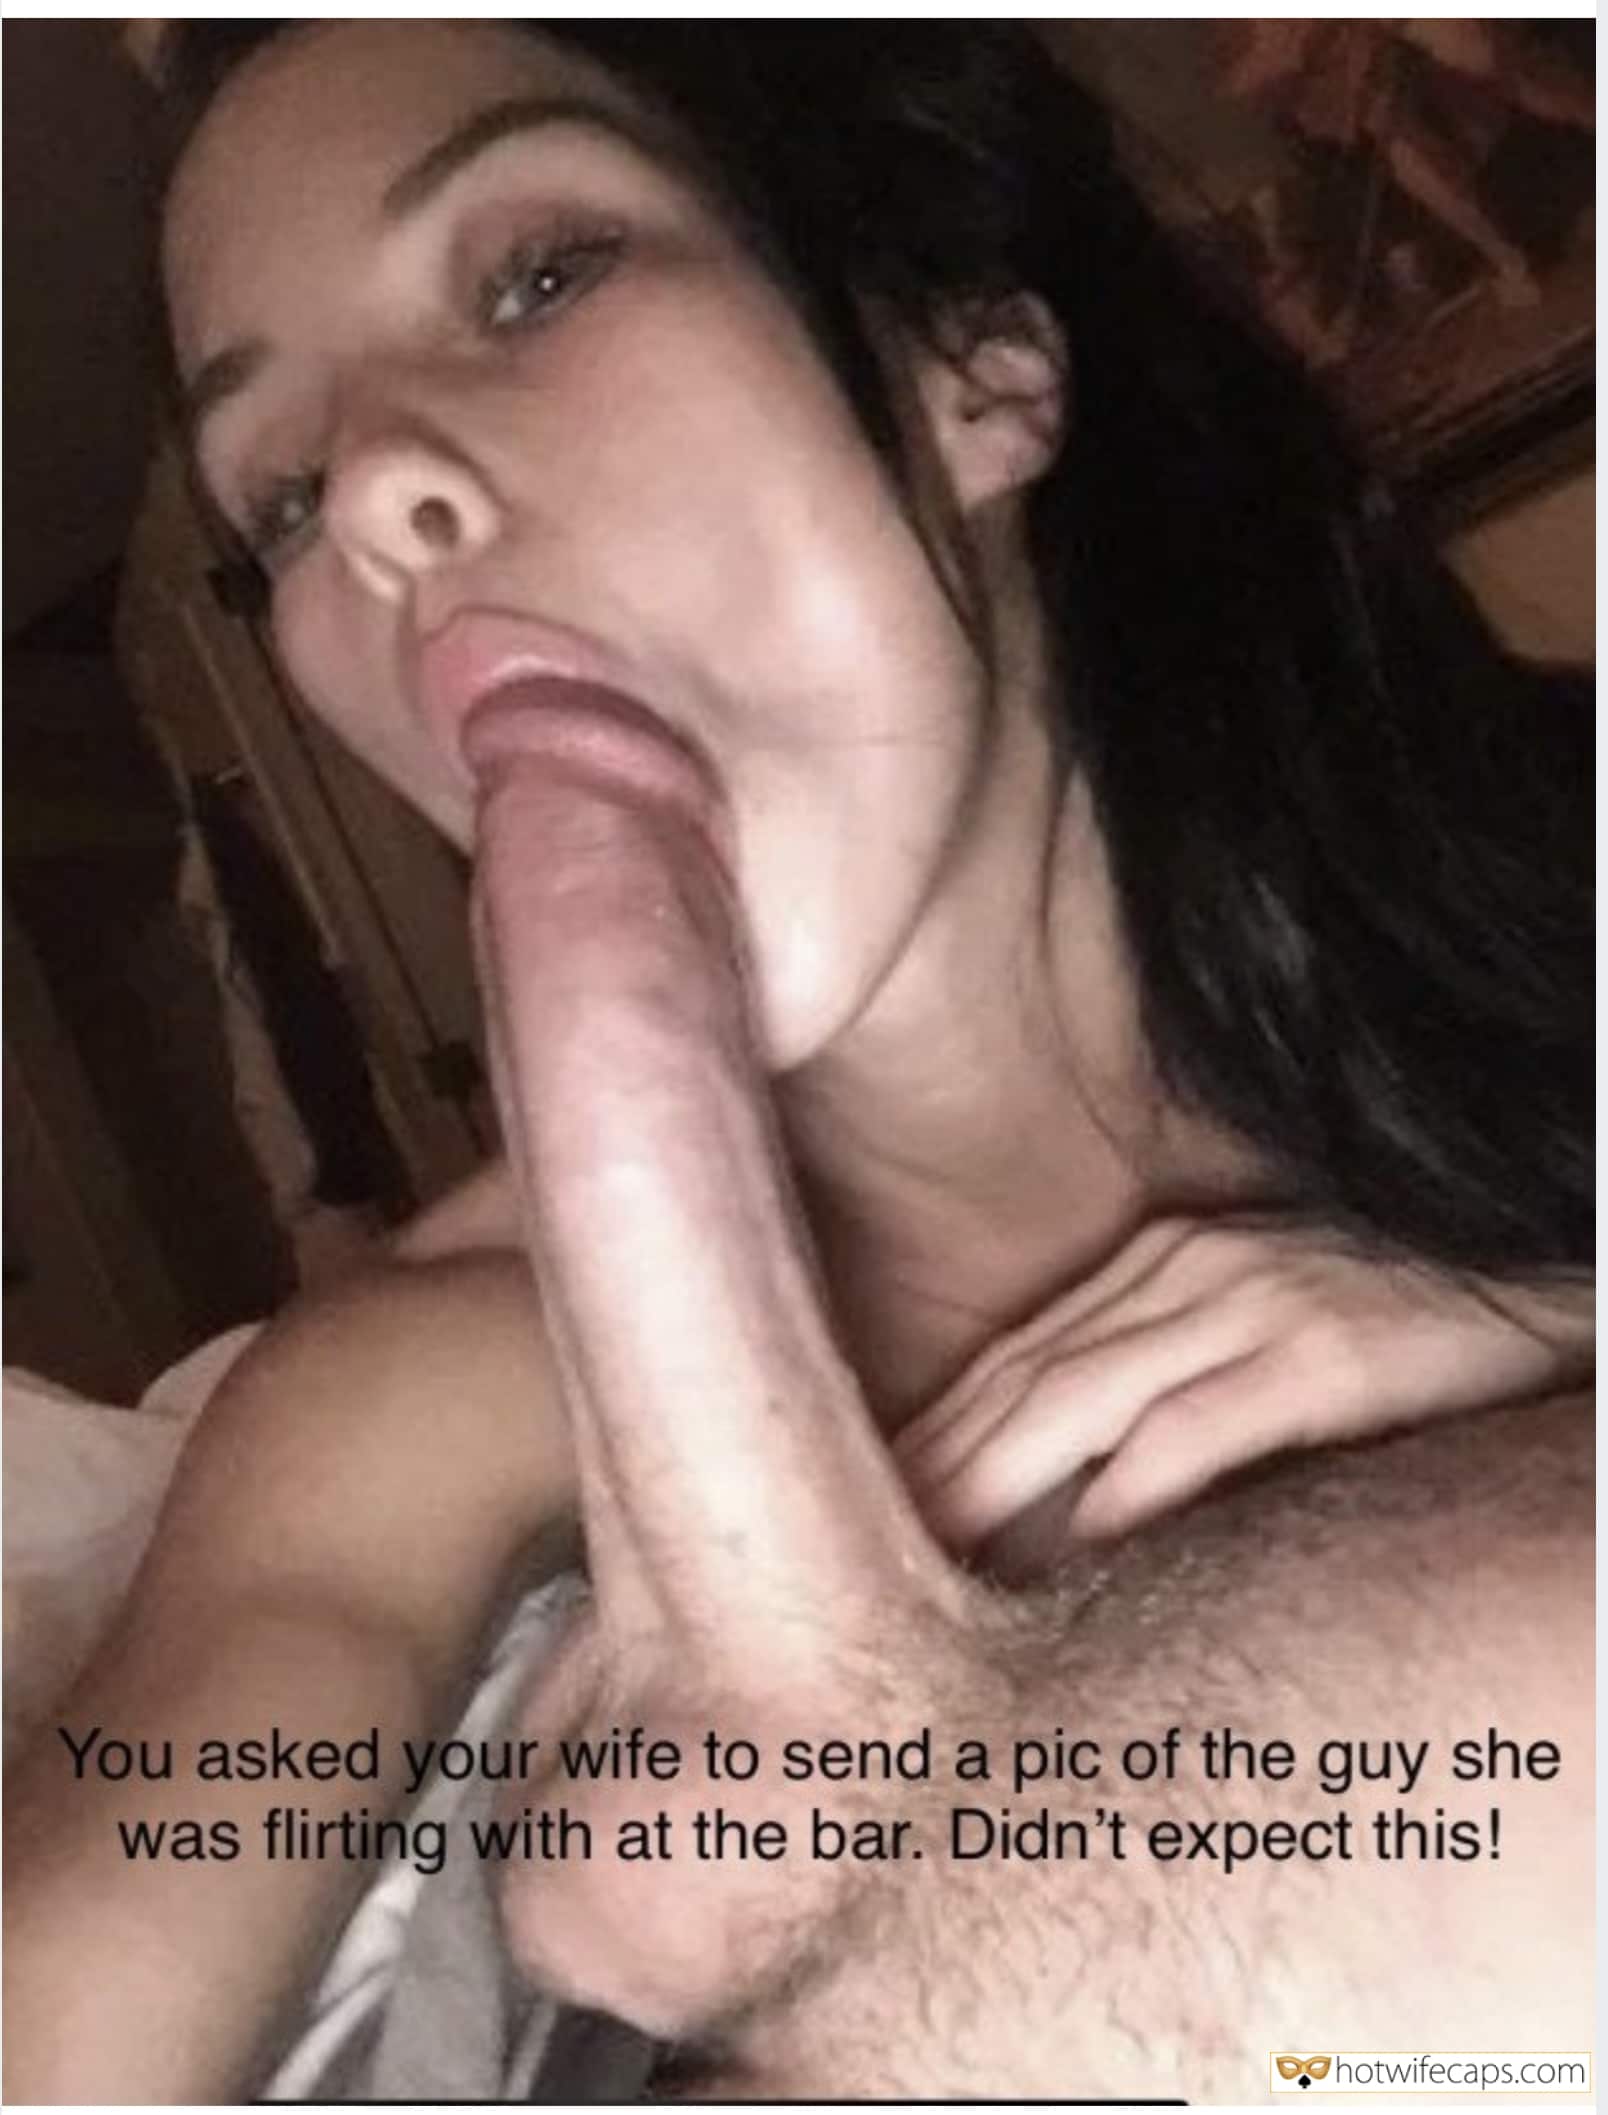 Cheating Blowjob Bigger Cock hotwife caption: You asked your wife to send a pic of the guy she was flirting with at the bar. Didn't expect this! Sucking His Big Pulsating Dick Head